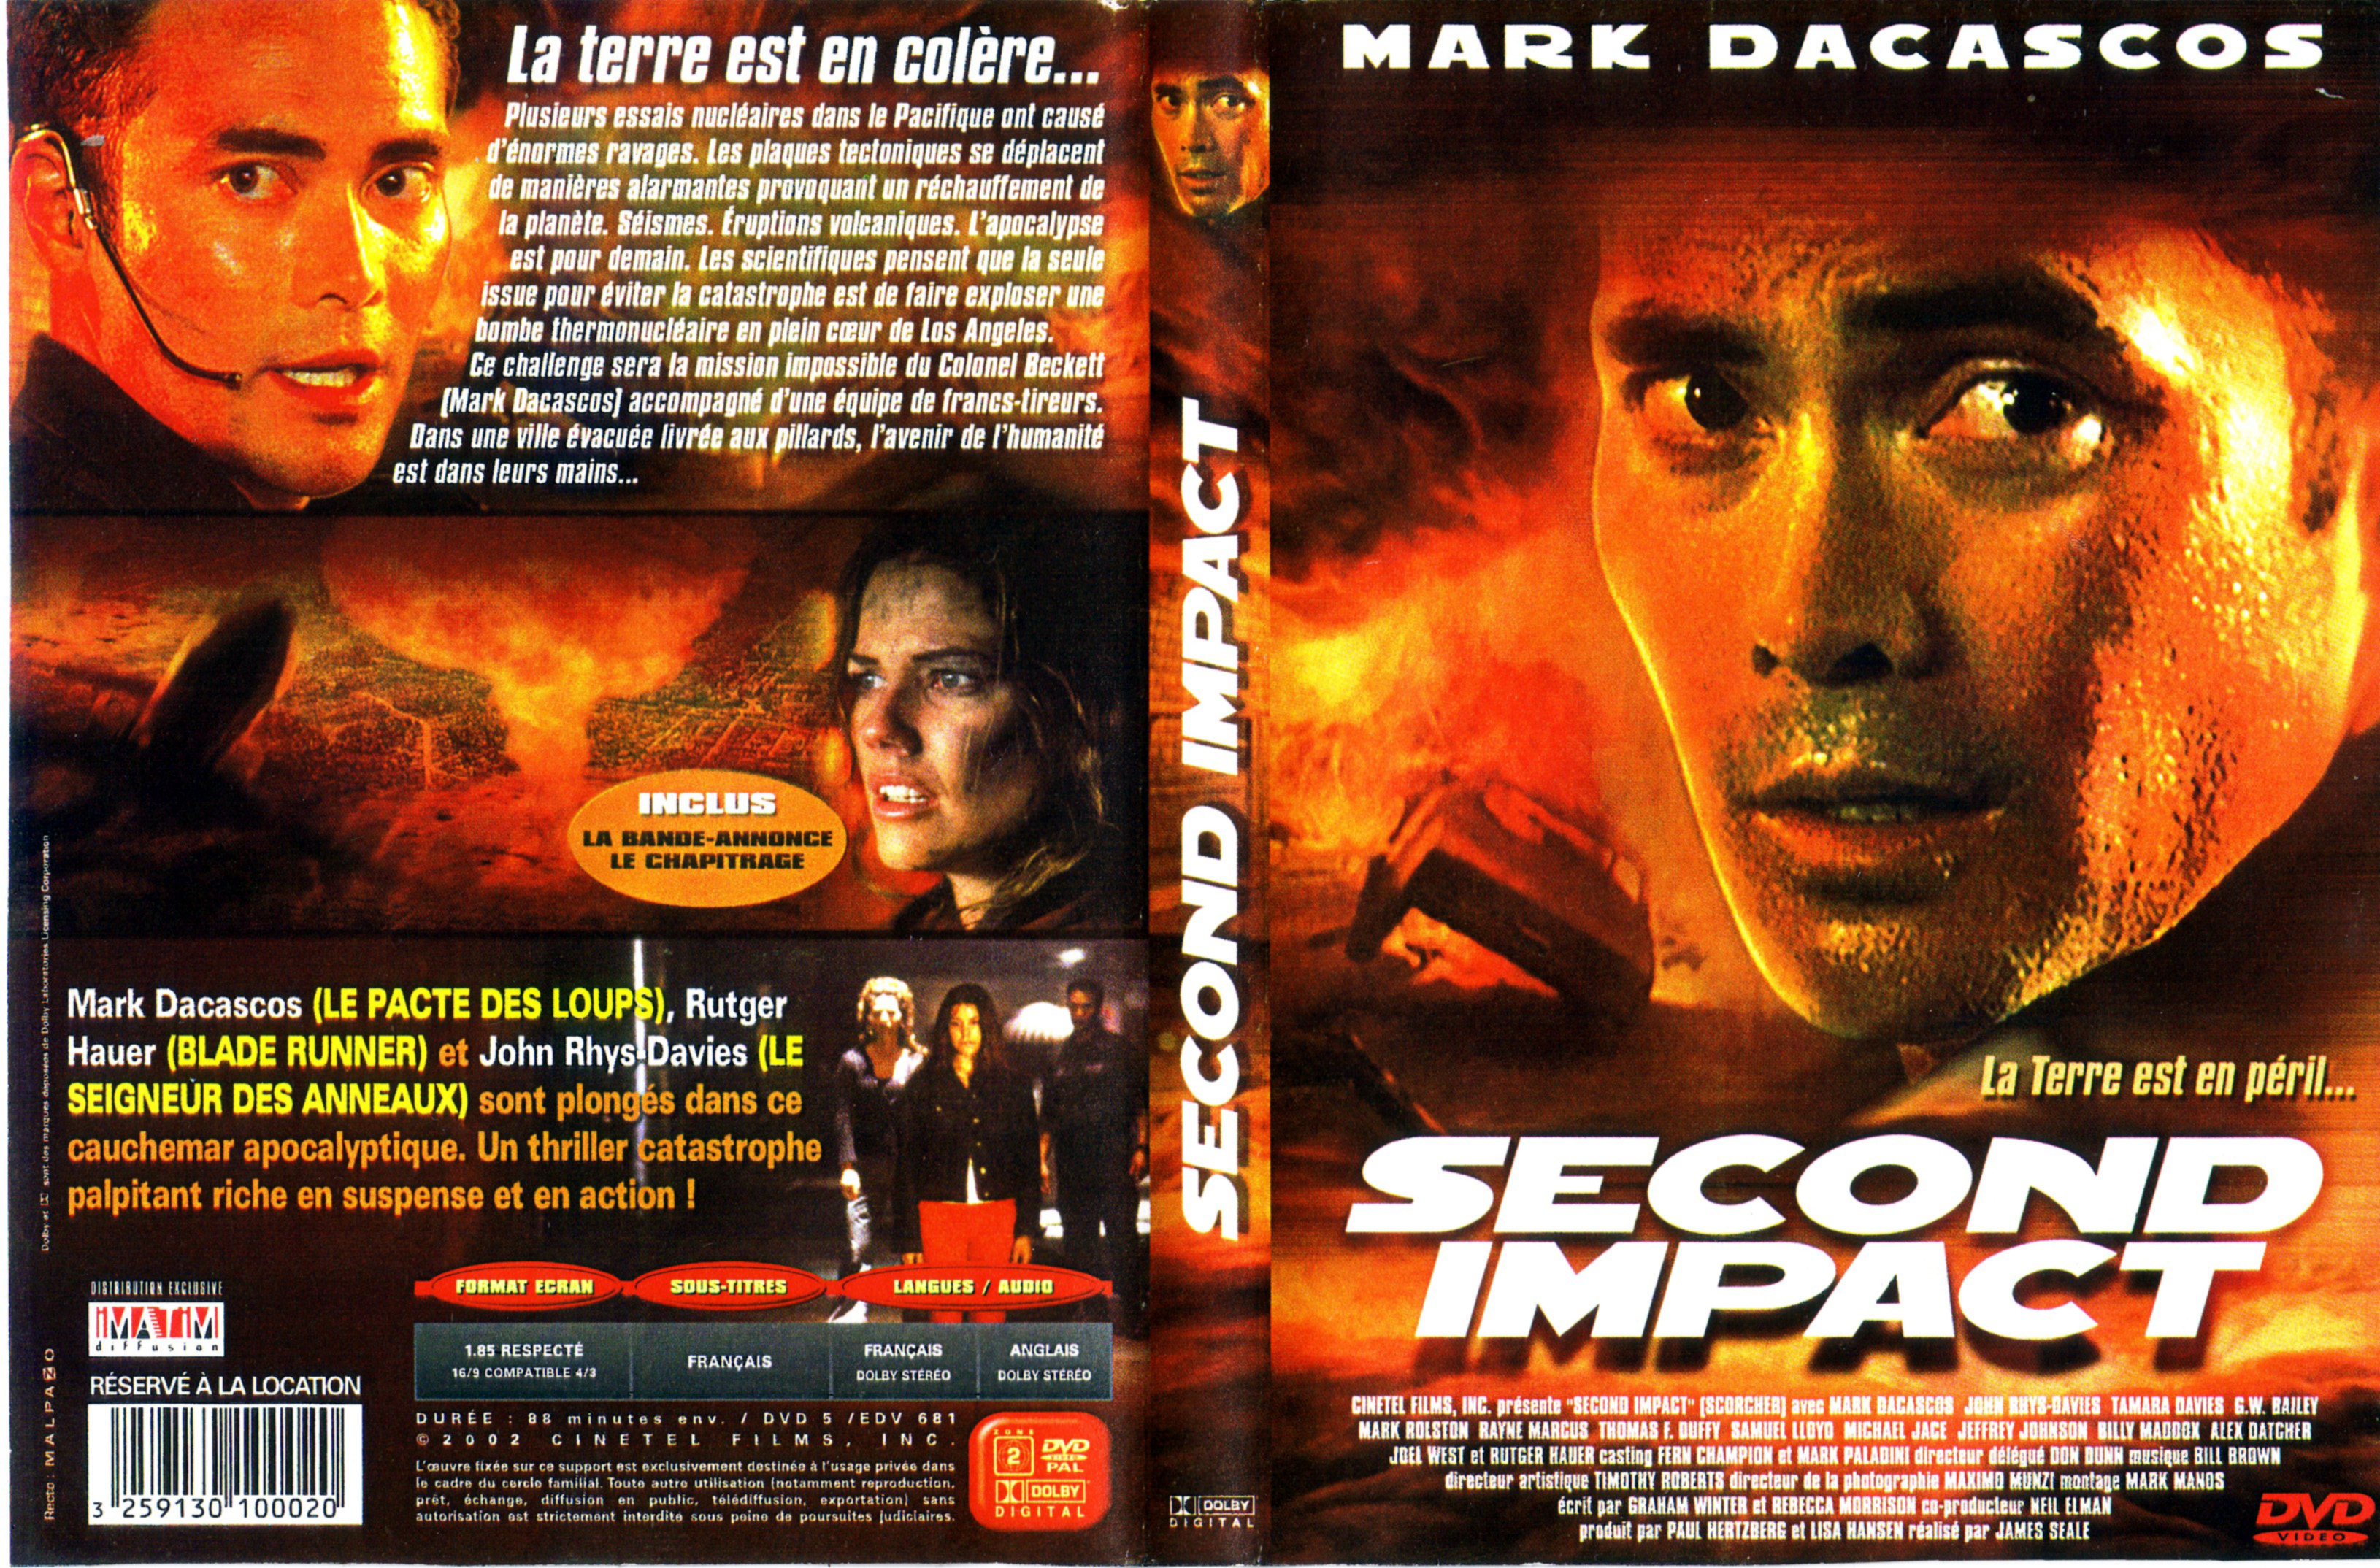 Jaquette DVD Second impact v2